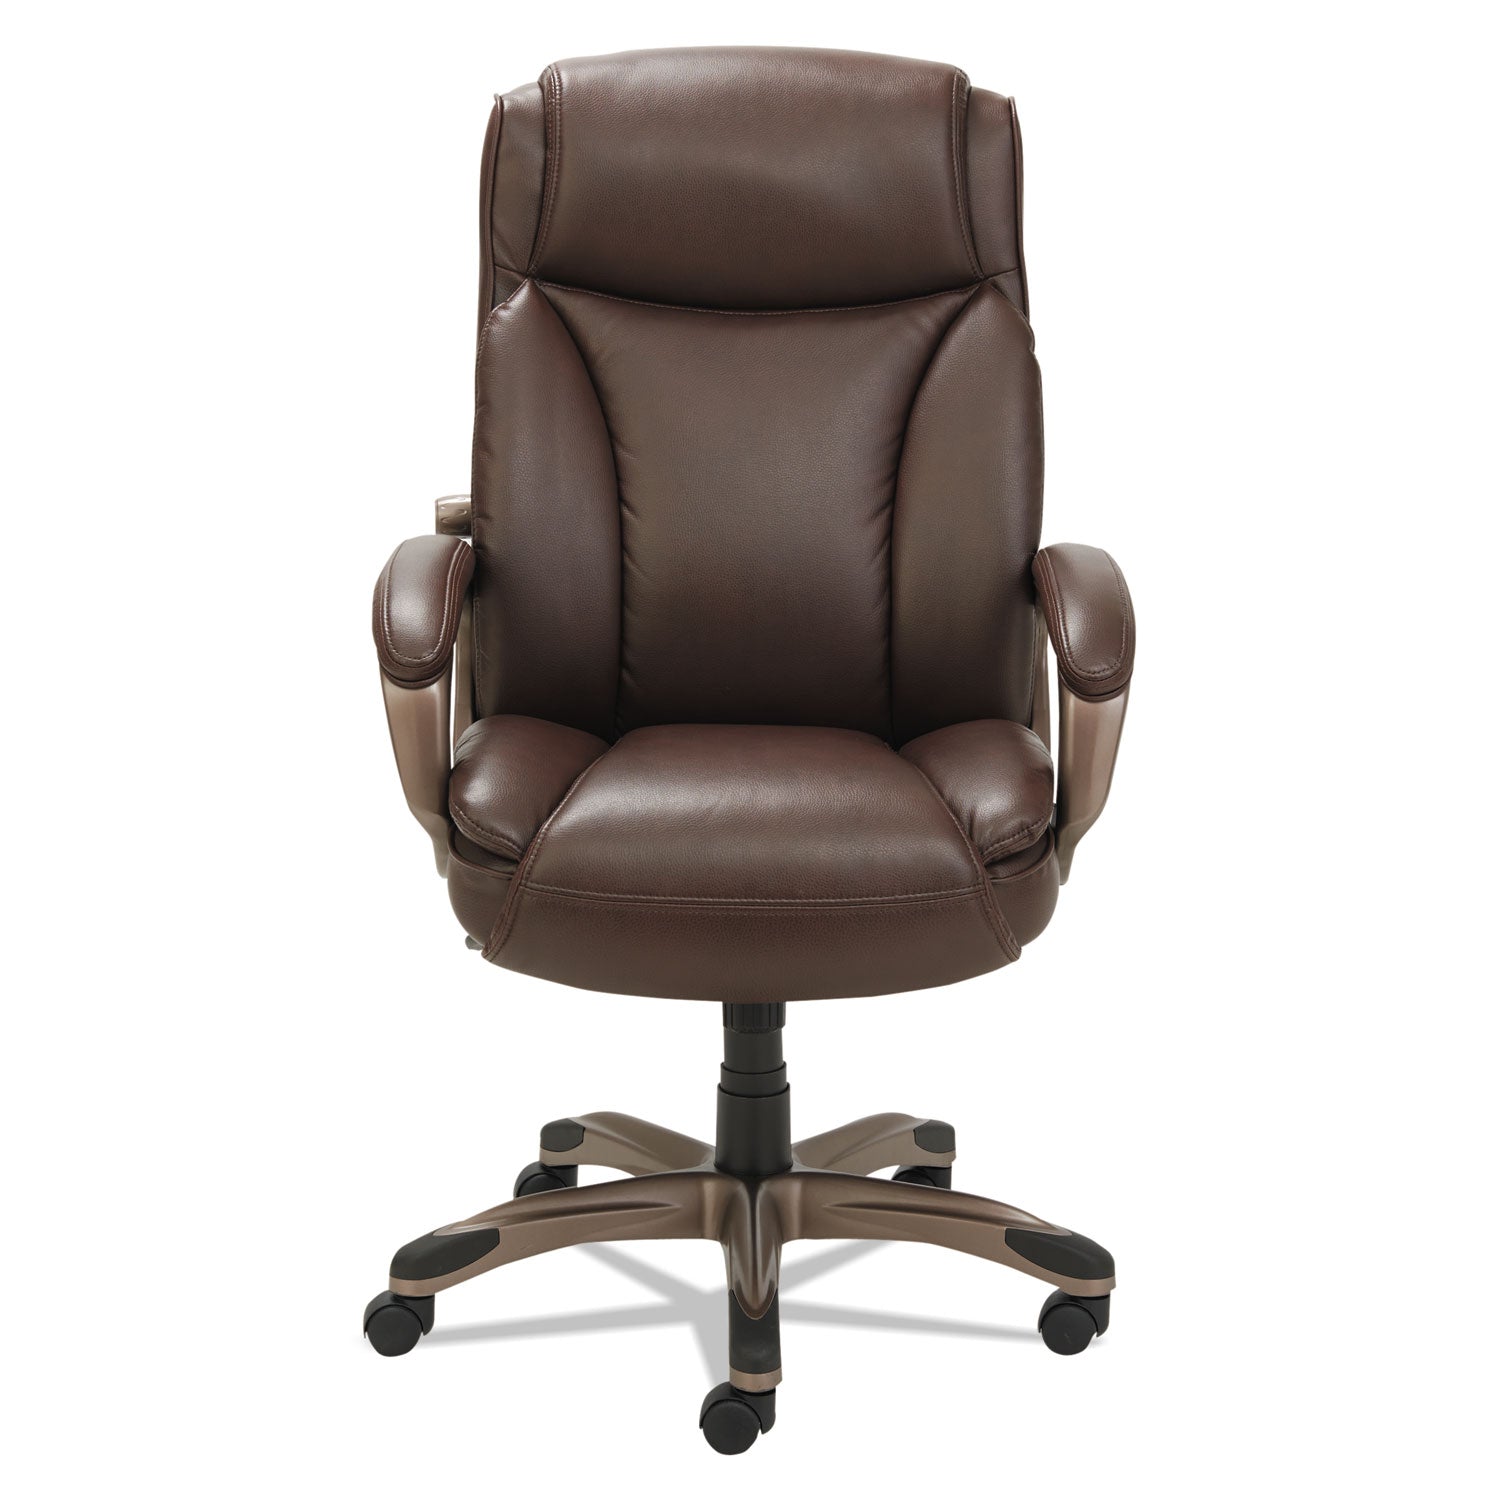 Alera Veon Series Executive High-Back Bonded Leather Chair, Supports Up to 275 lb, Brown Seat/Back, Bronze Base - 